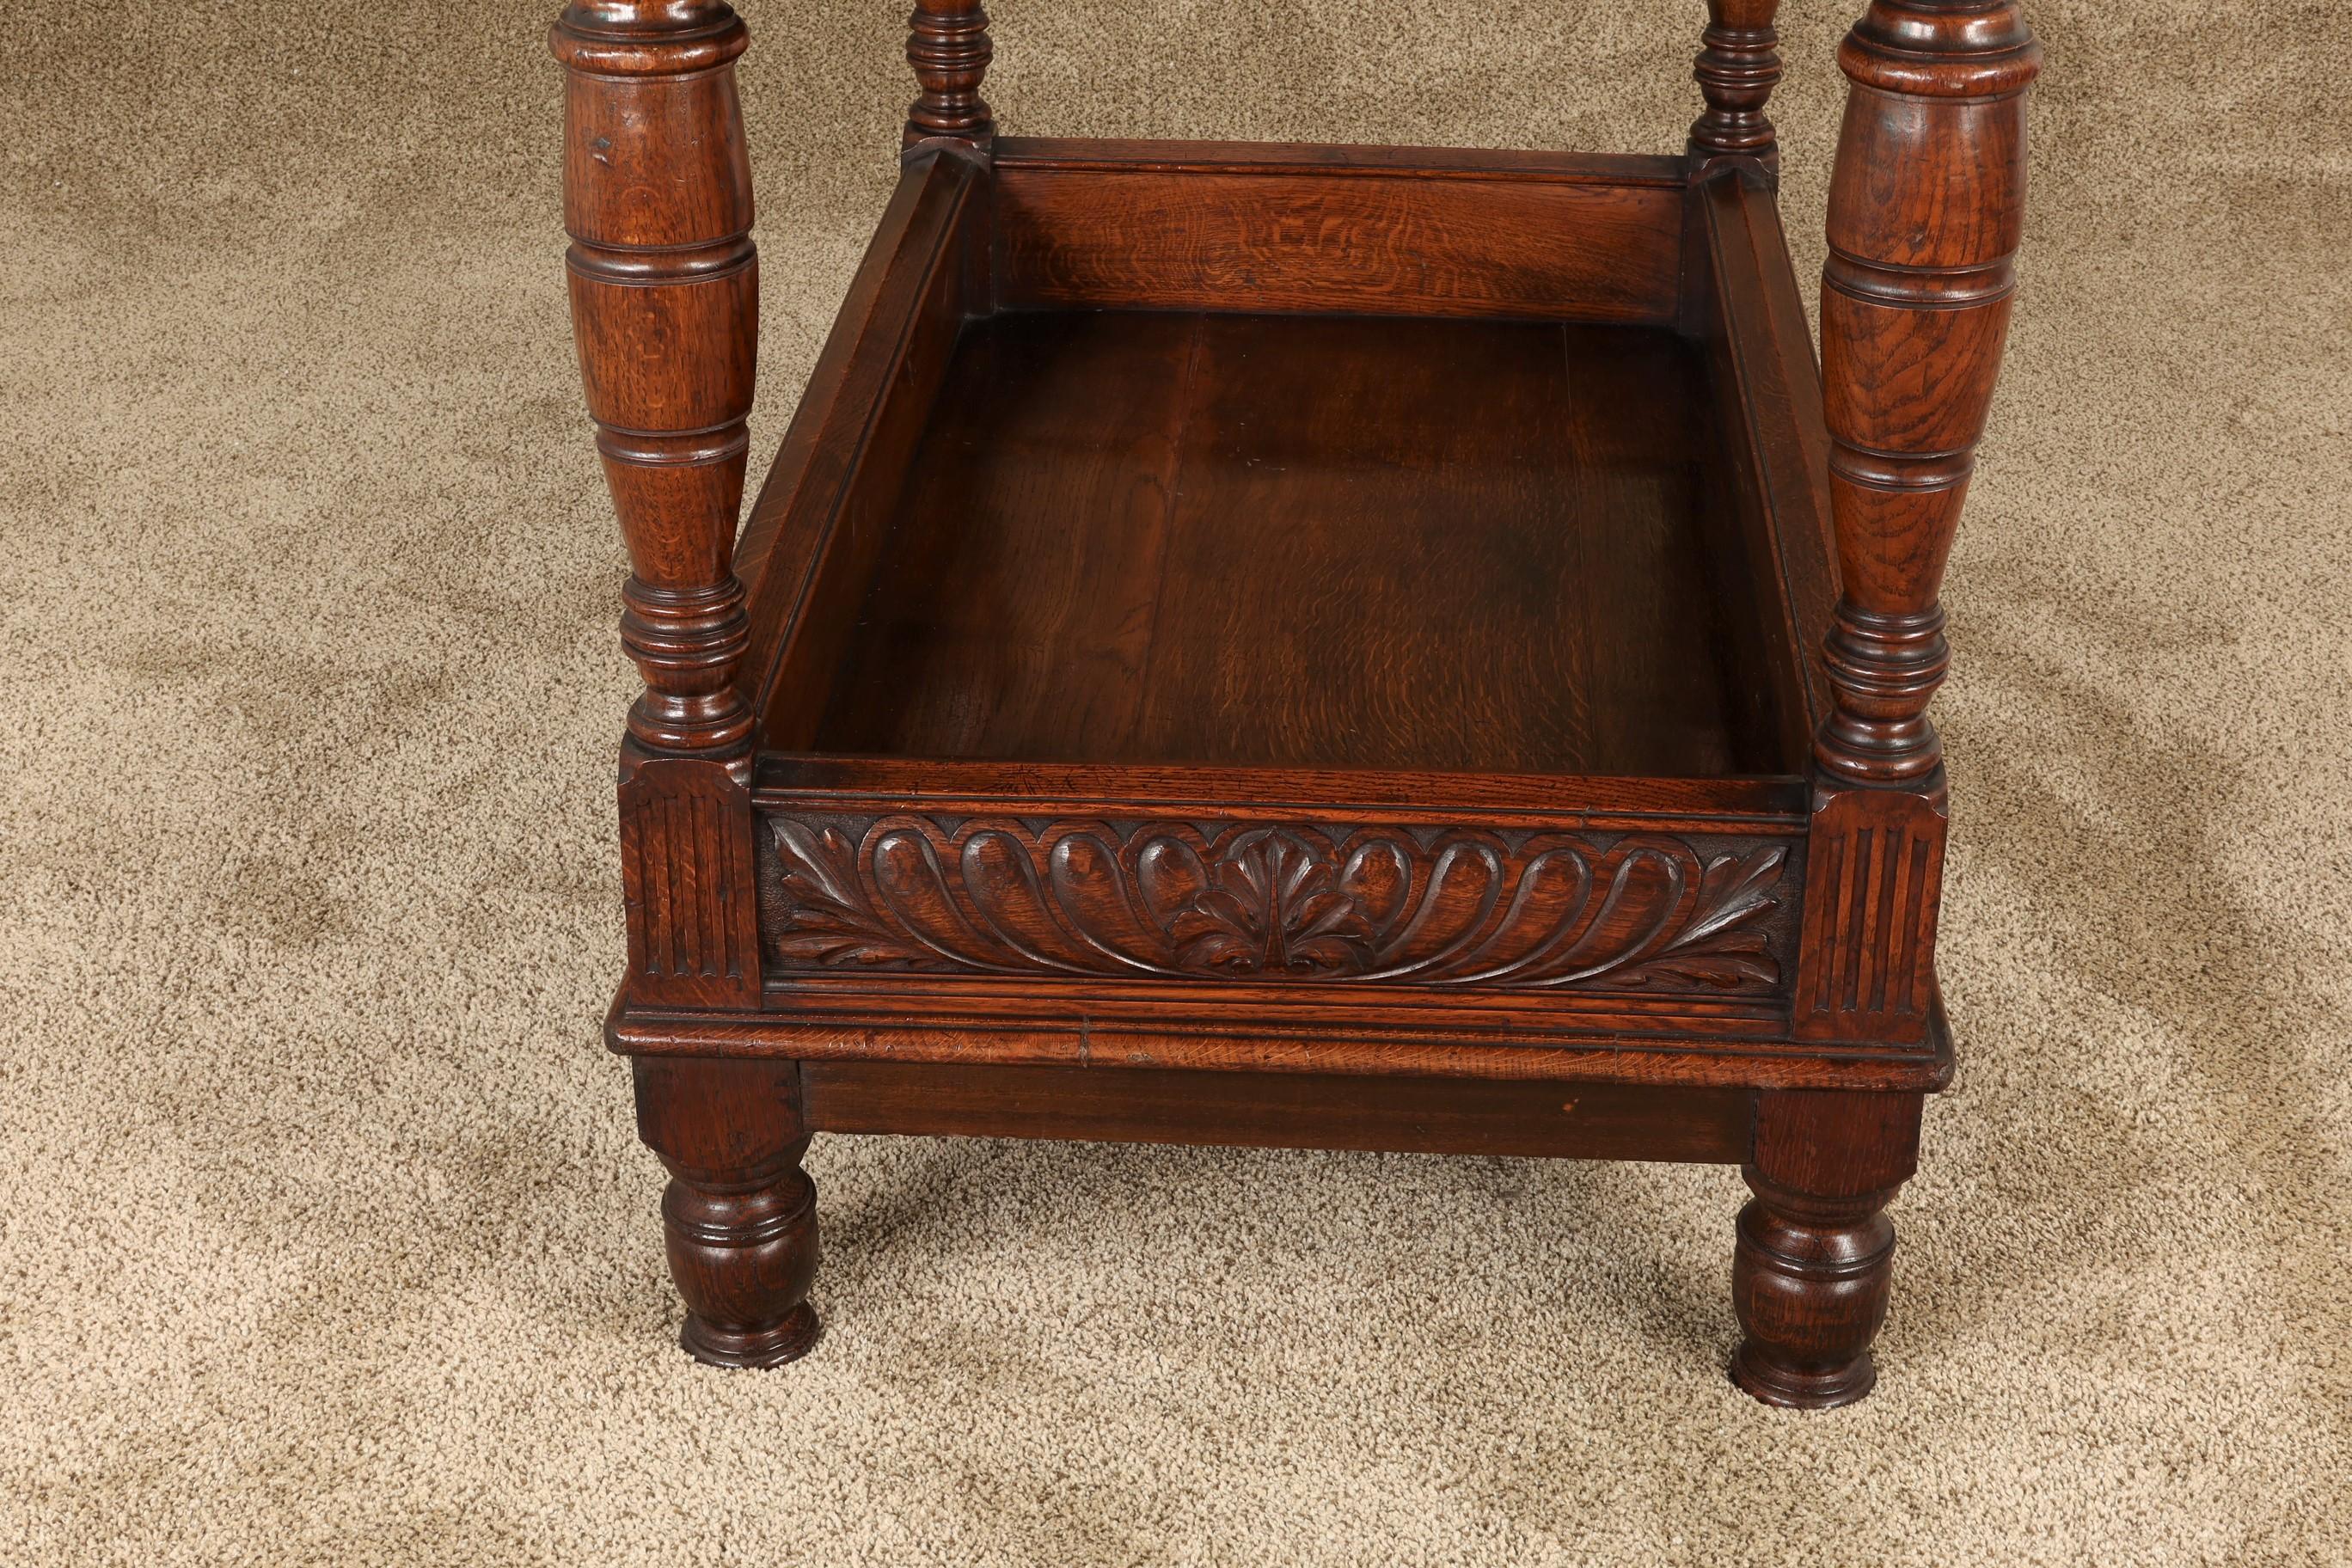 English Tudor Revival Oak Server with Exceptional Carvings, circa 1890 For Sale 3